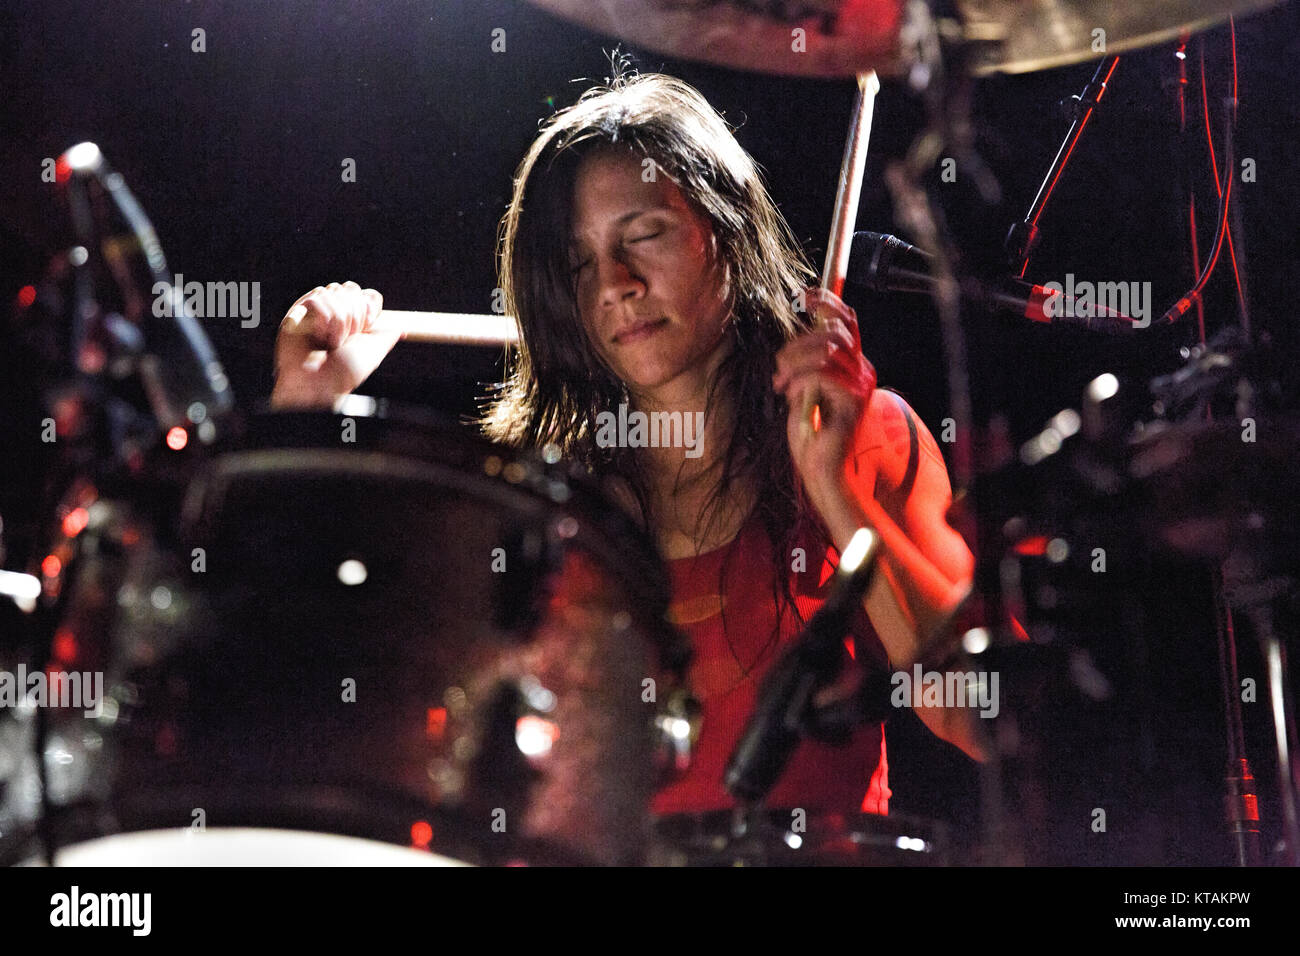 The American rock band Helms Alee performs a live concert at Copenhagen  Jazzhouse. Here drummer Hozoji MArgullis is seen live on stage. Denmark,  28/04 2015 Stock Photo - Alamy